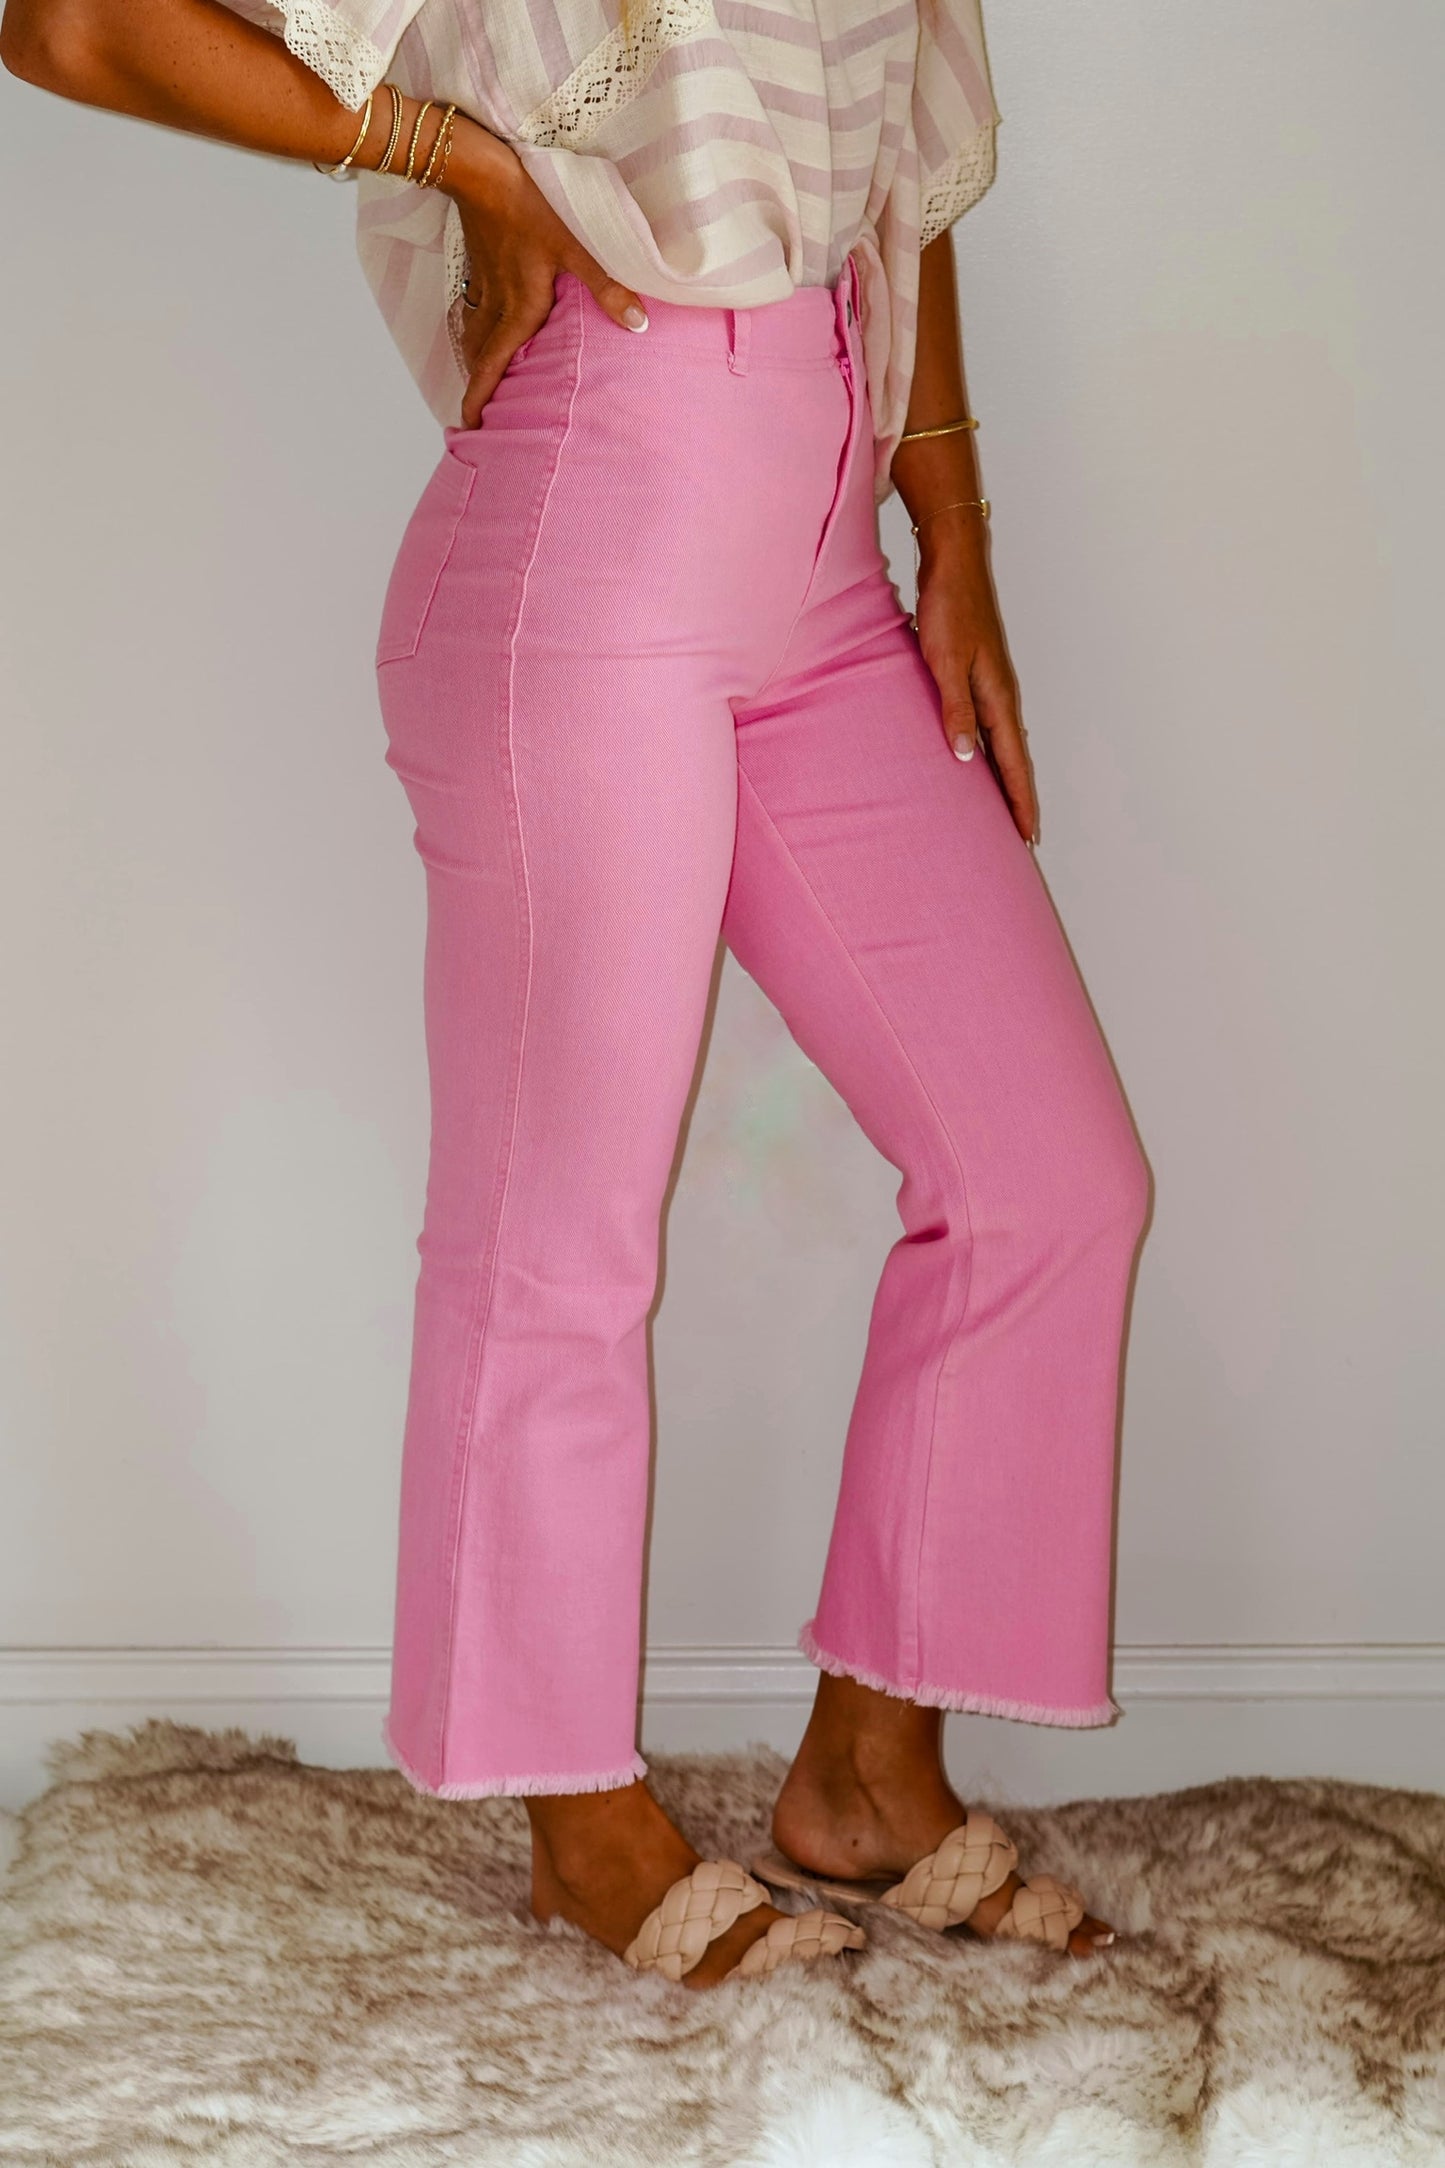 Judy Raw Hem High Waisted Pants Button Closure Wide Leg that hits above the ankle High Rise Cute edge detail Comfortable, stretchy fit 97% Cotton,3%Spandex Dry Clean Only Model is wearing size XSJudy Raw Hem High Waisted Pants Button Closure Wide Leg that hits above the ankle High Rise Pink Color Cute edge detail Comfortable, stretchy fit 97% Cotton,3%Spandex Dry Clean Only